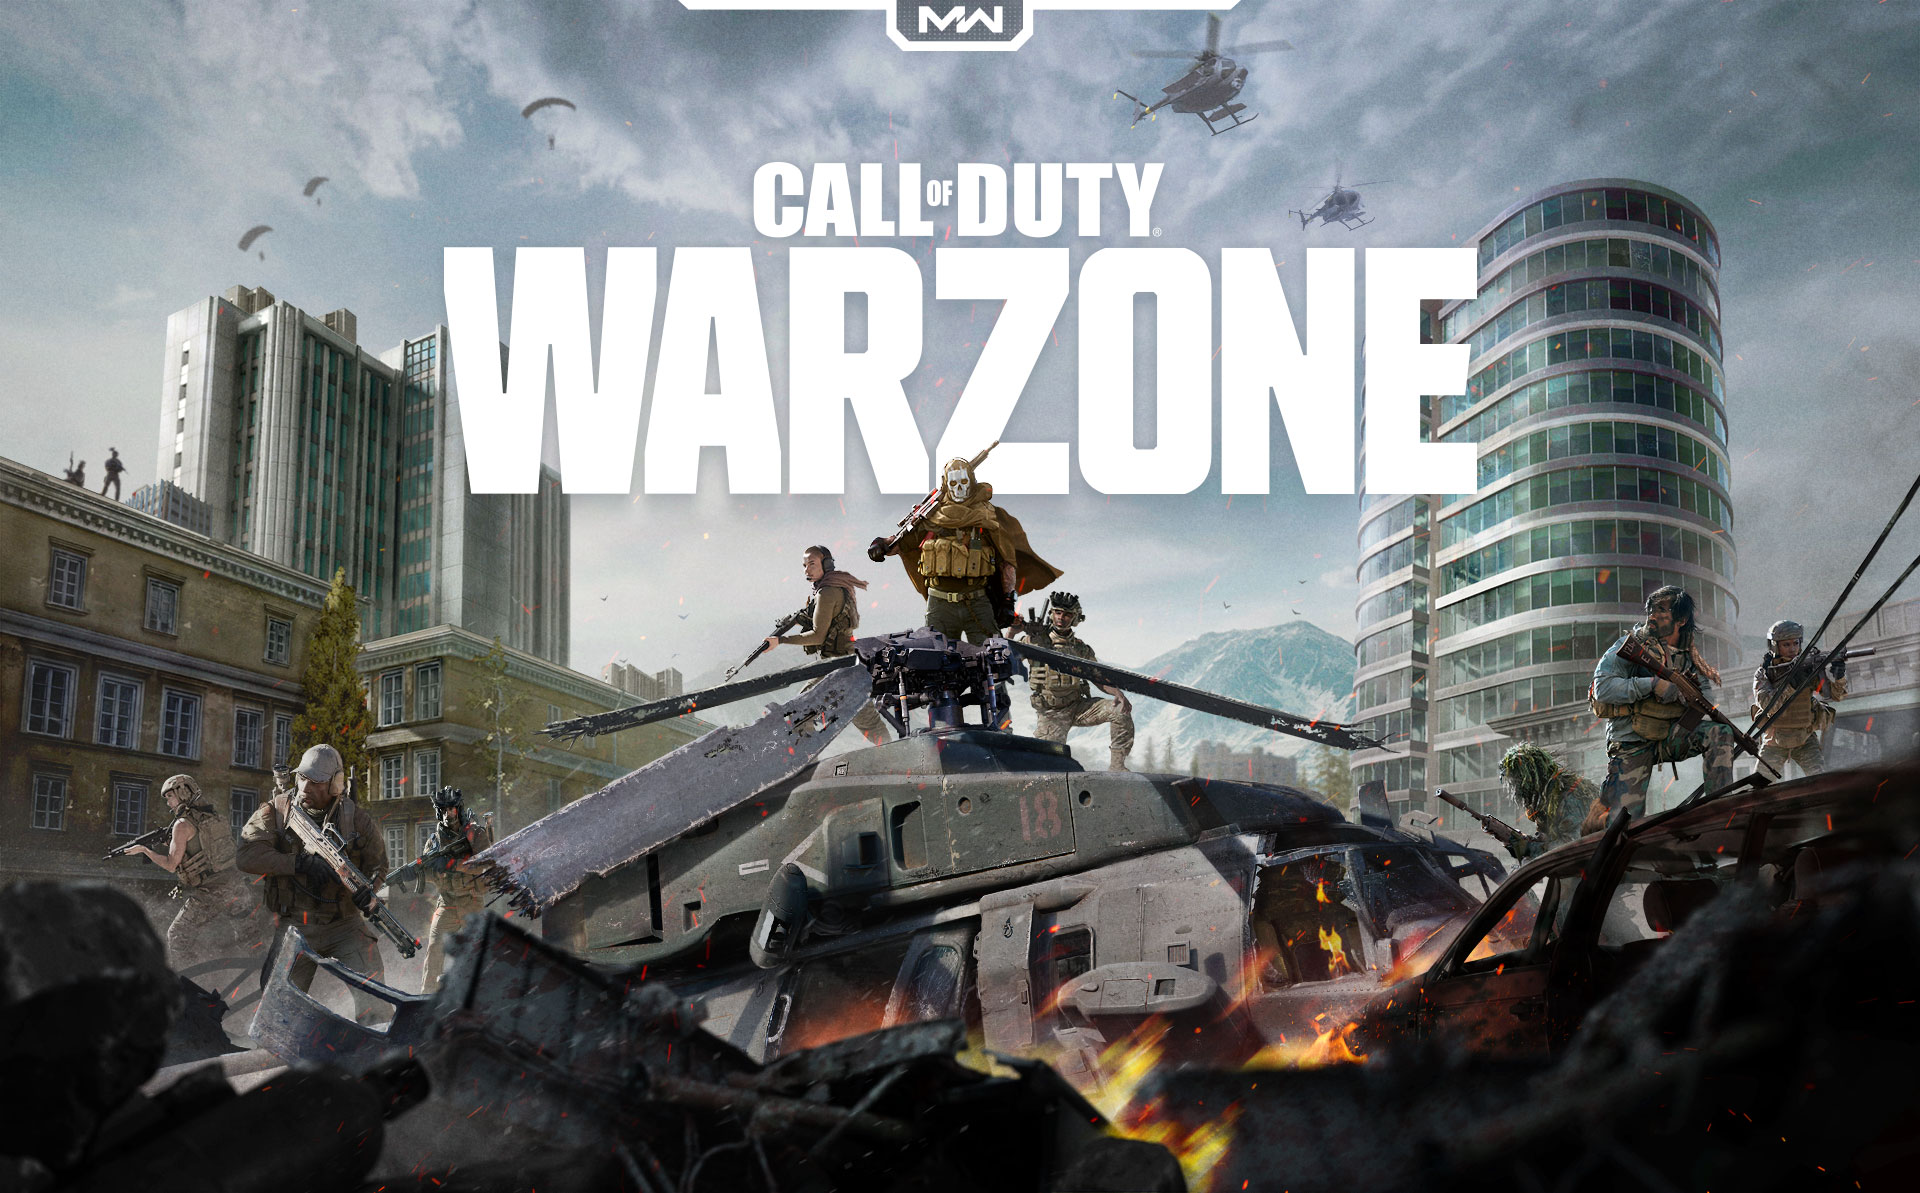 Free prime gaming loot is now available for call of duty: warzone and black ops cold war!